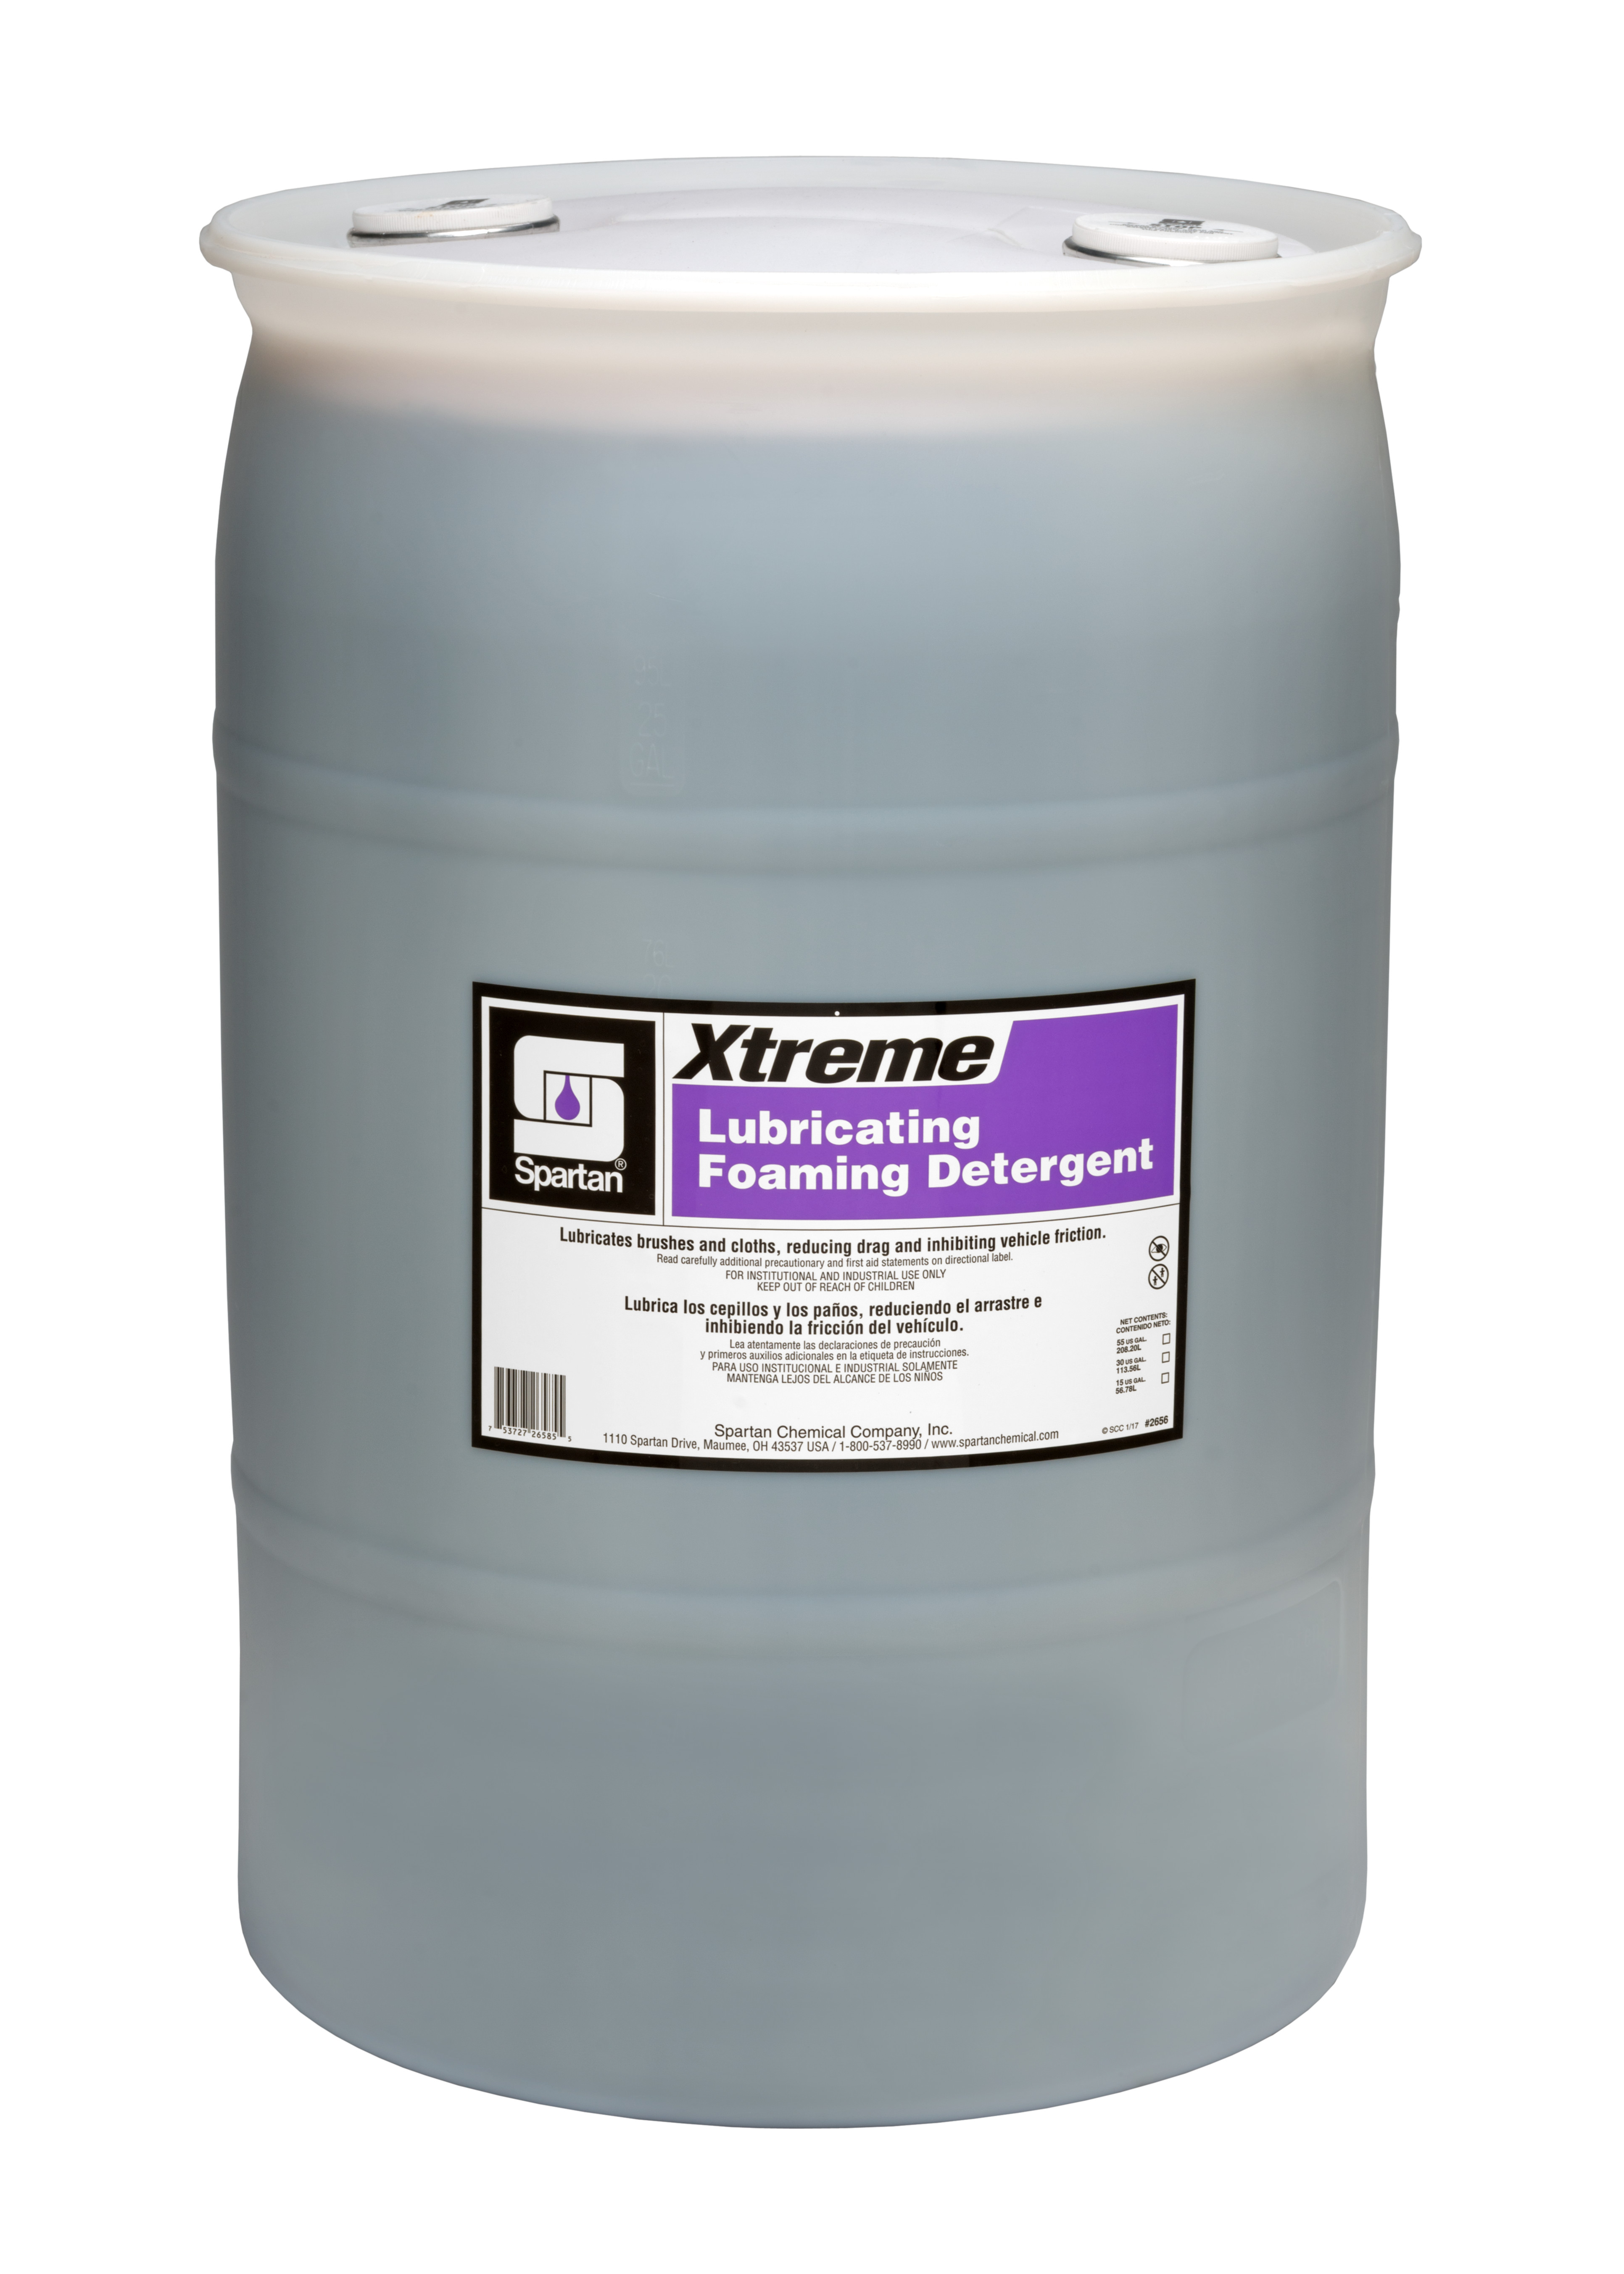 Spartan Chemical Company Xtreme Lubricating Foaming Detergent, 30 GAL DRUM